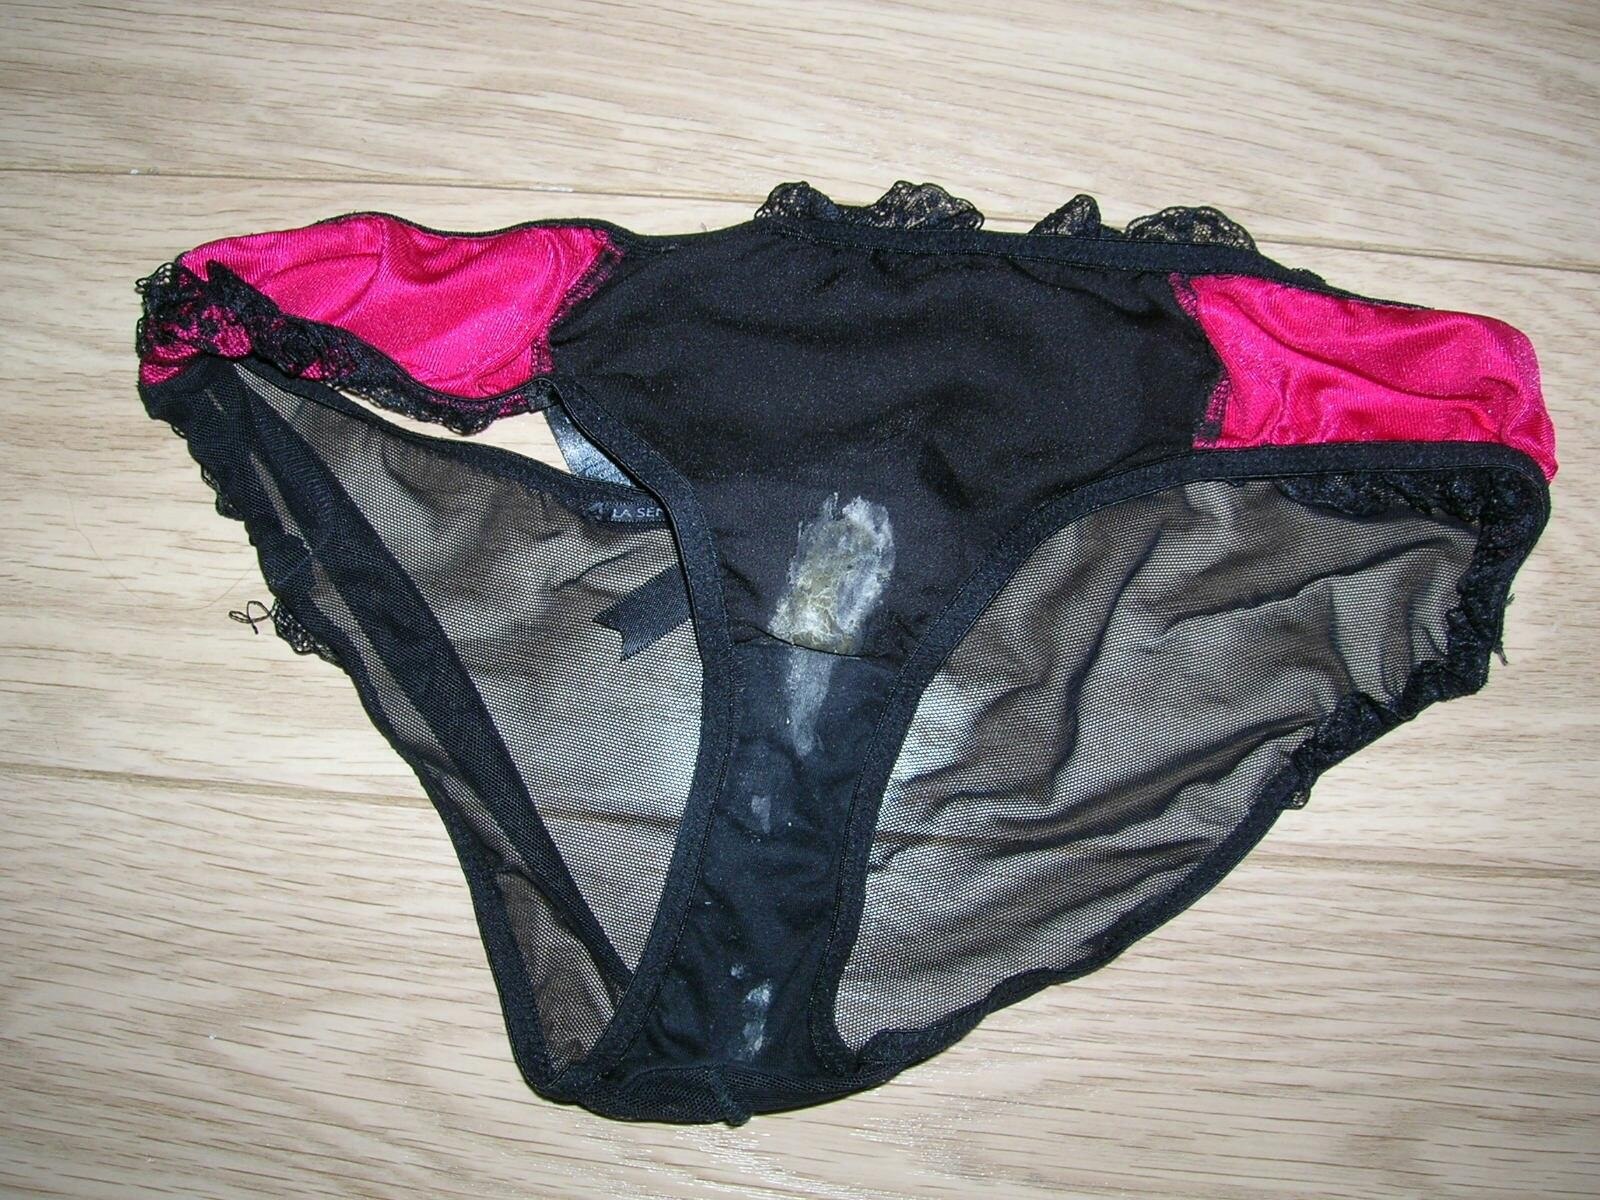 dirty worn panties He said he did not participate in any violence. dirty wo...